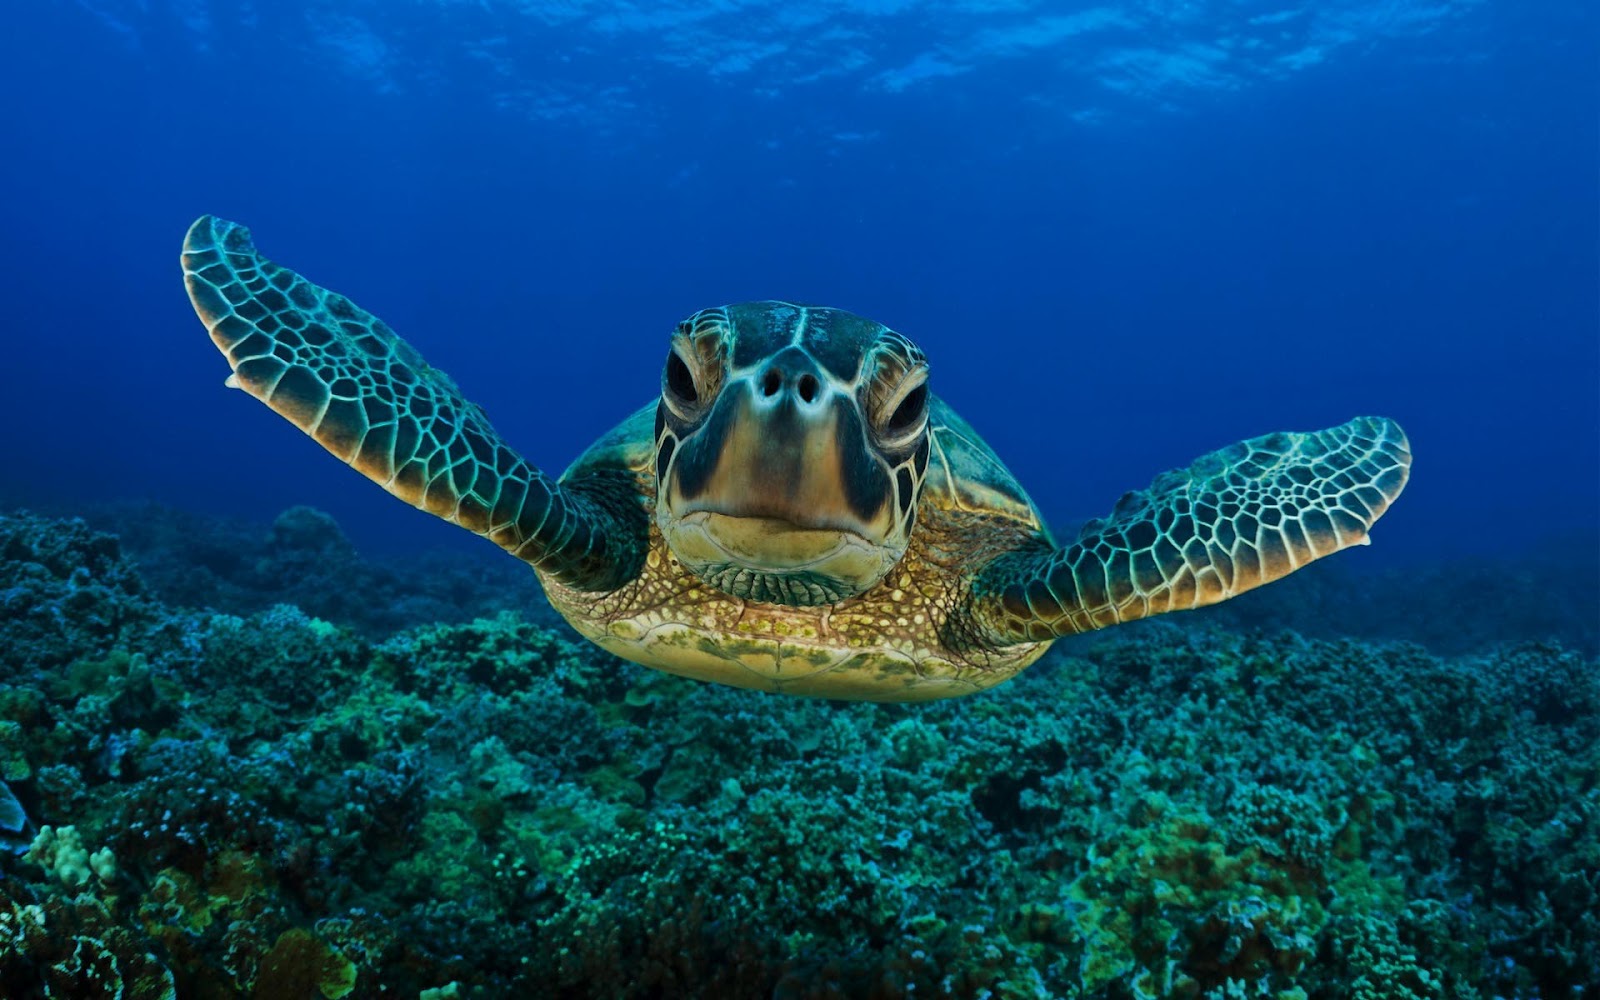 Swimming Turtle Underwater Picture Hd Animals Wallpapers HD Wallpapers Download Free Images Wallpaper [wallpaper981.blogspot.com]